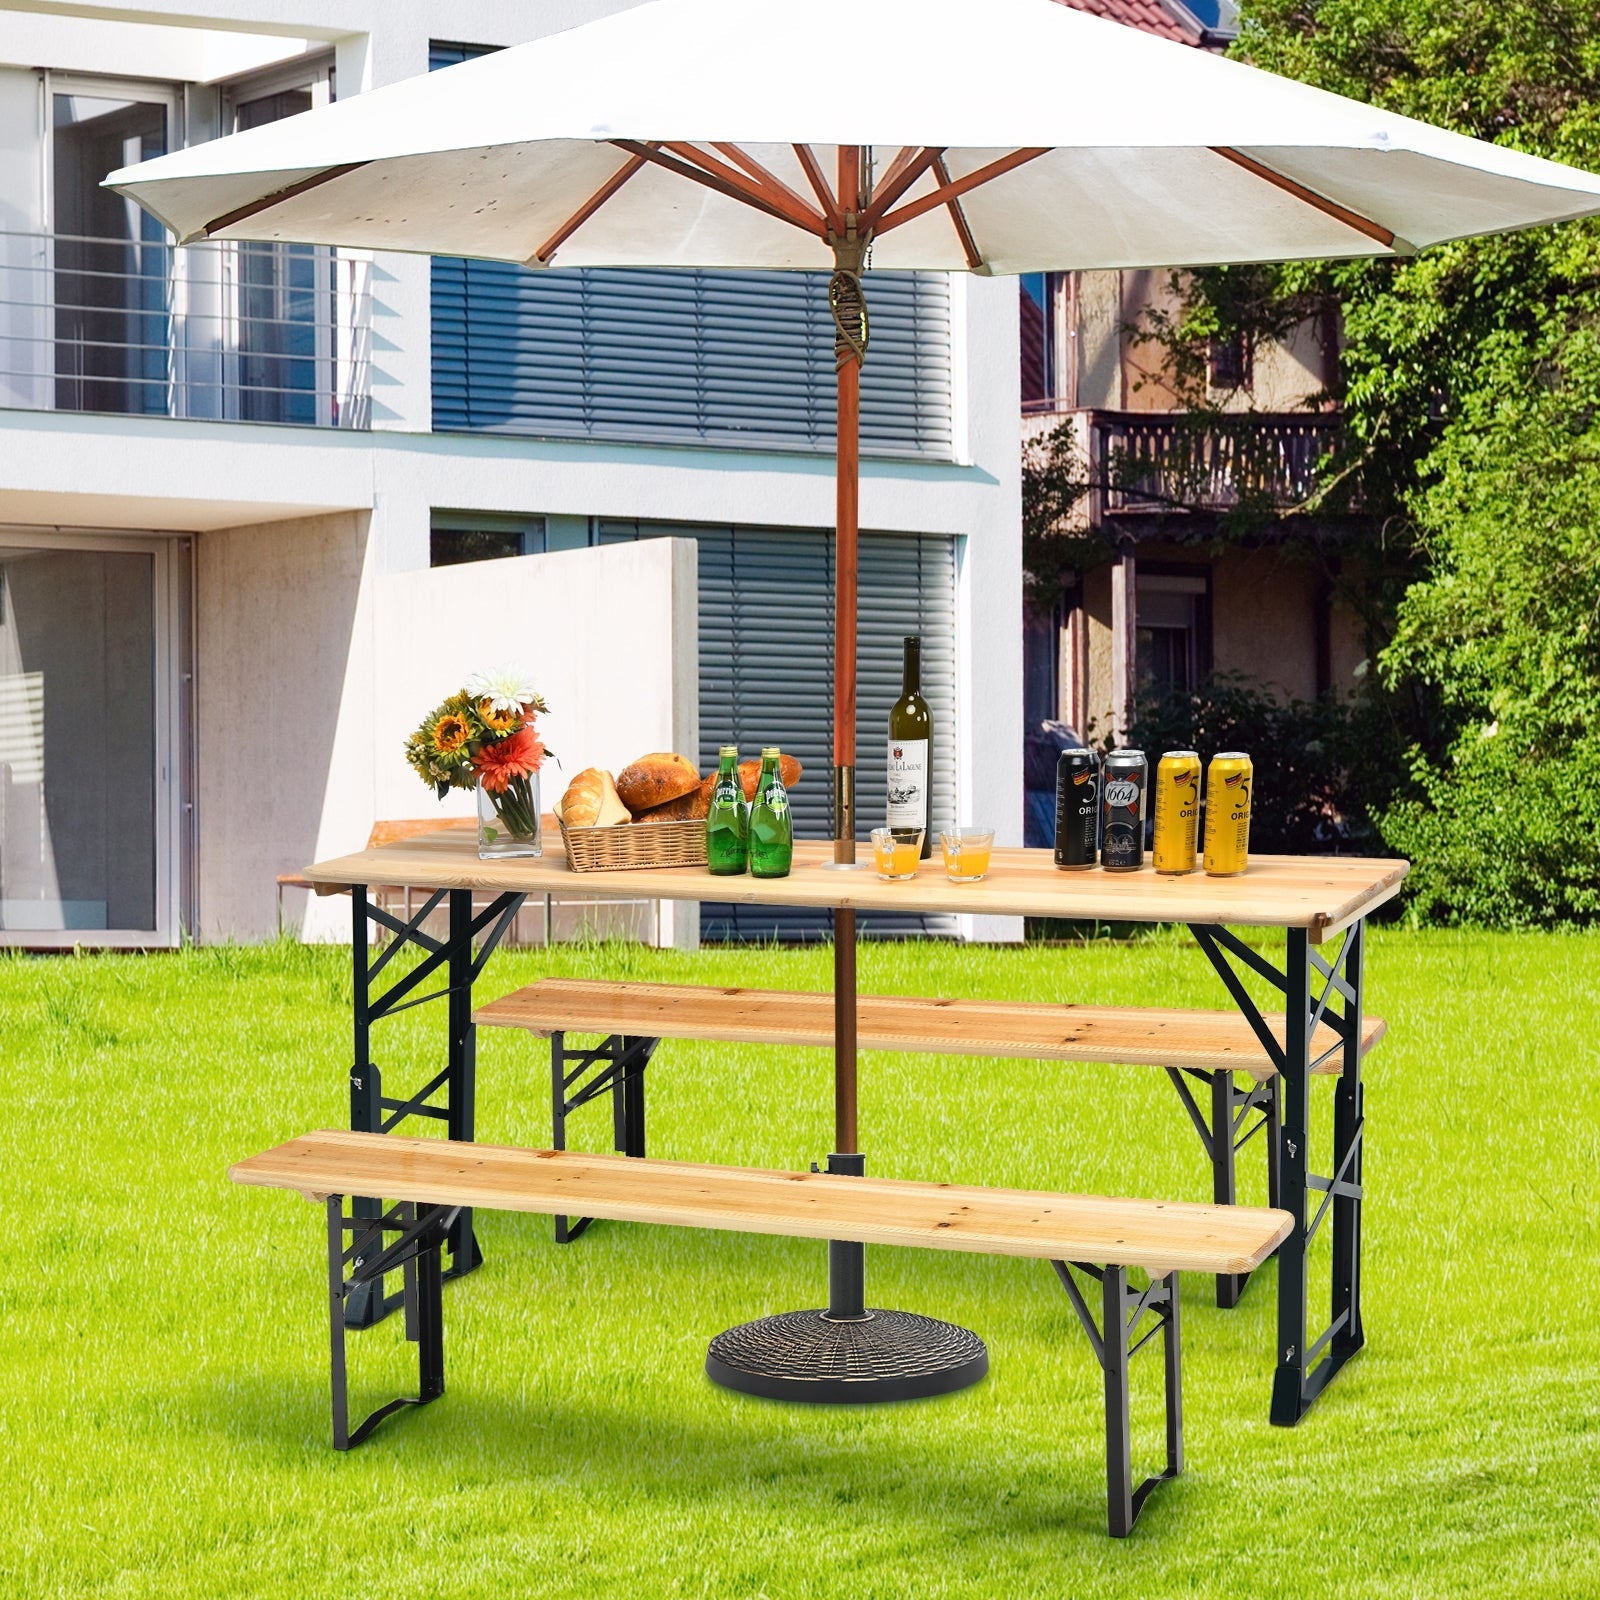 66.5 Inch Adjustable Heights Folding Beer Table with Umbrella Hole for Camping and Picnic